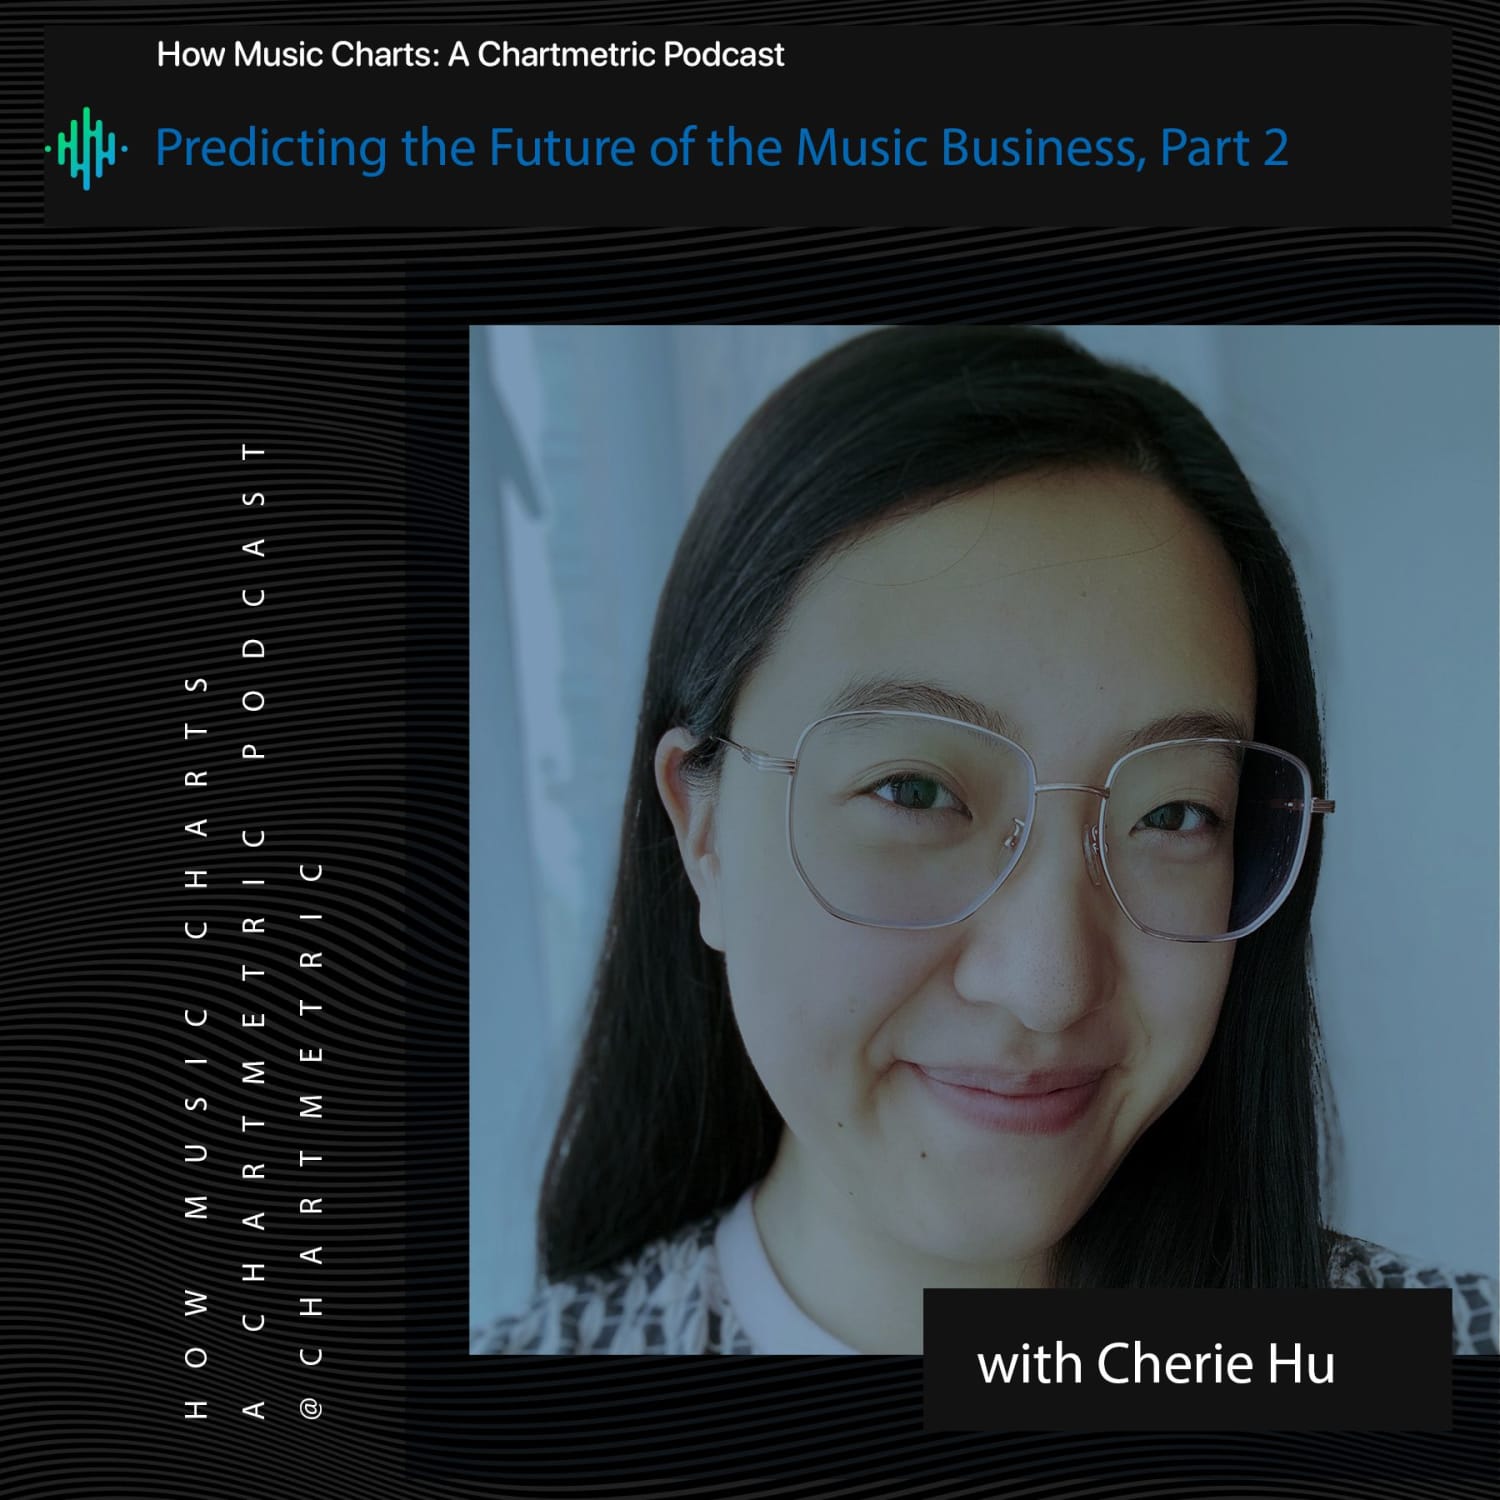 How Music Charts: The Future of the Music Business w/ Cherie Hu, Pt. 2